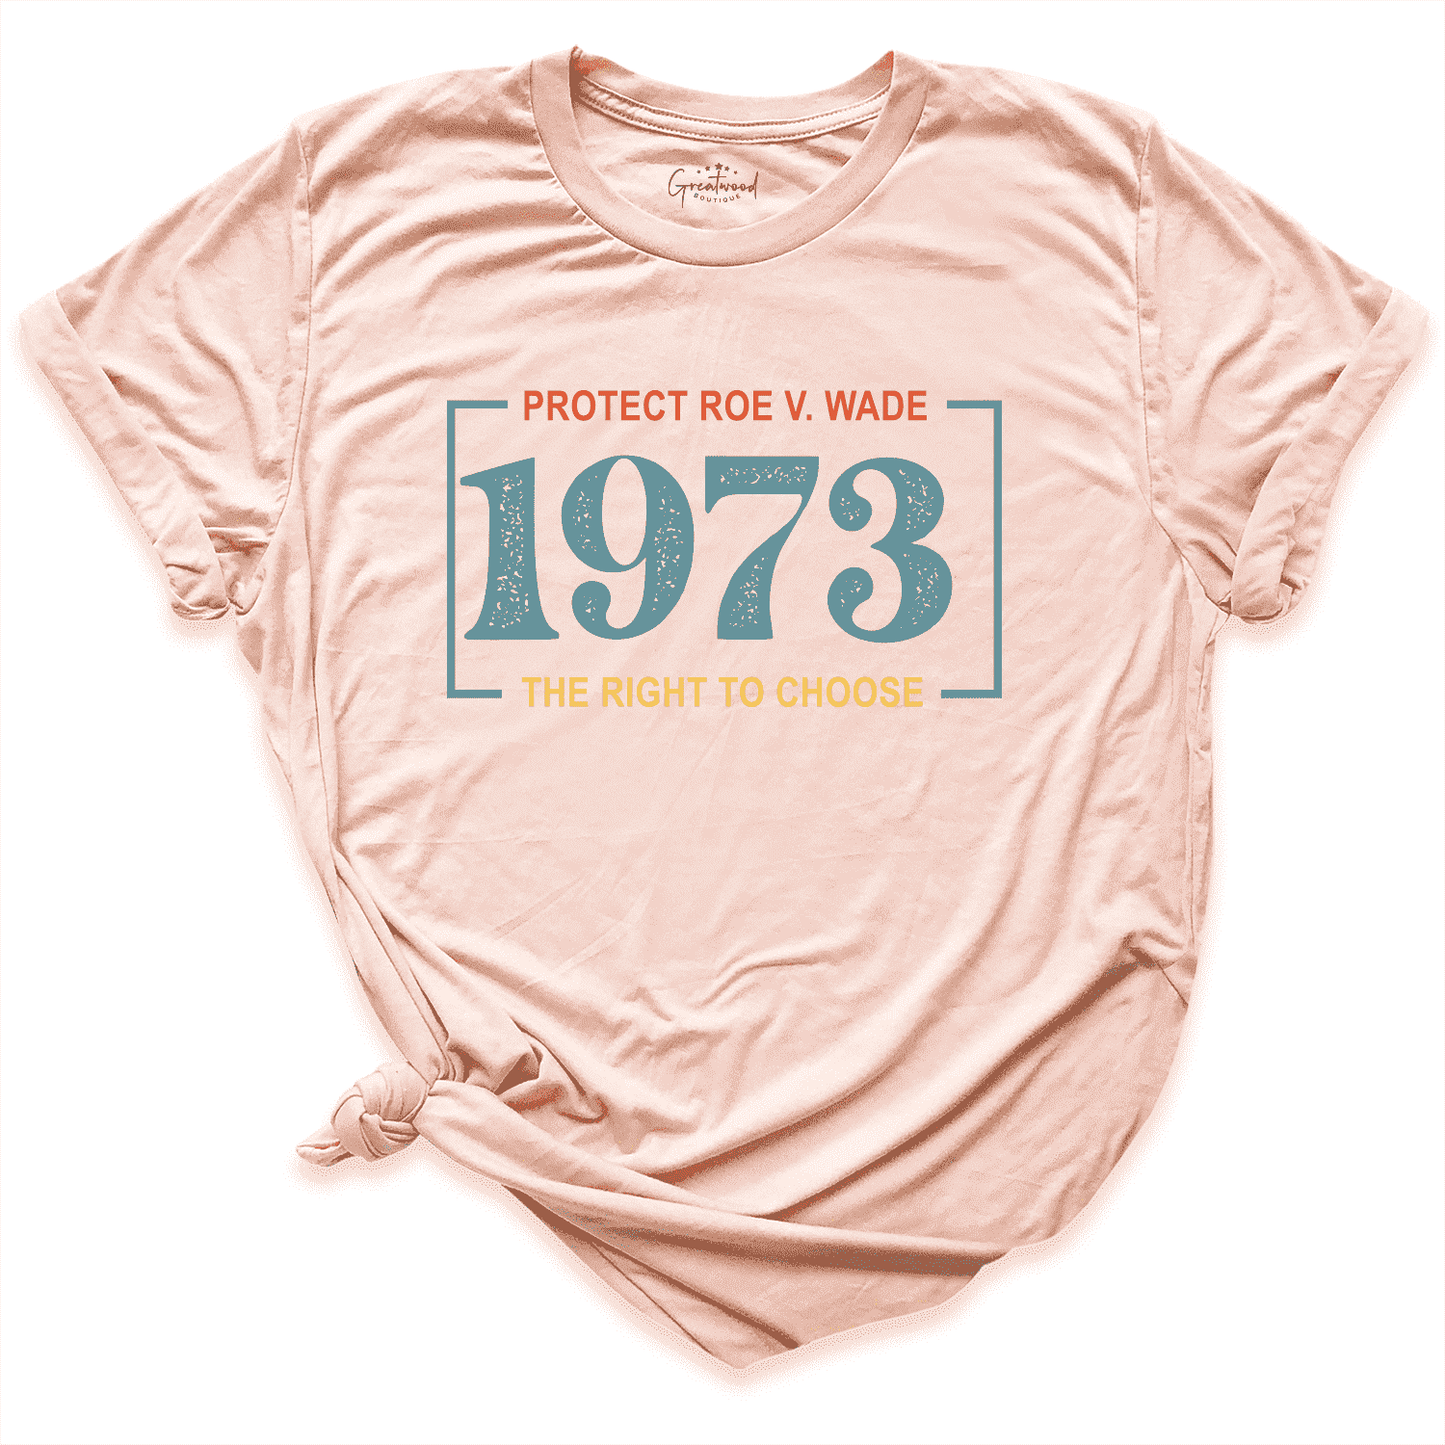 Protect Roe V. Made 1973 Shirt Peach - Greatwood Boutique